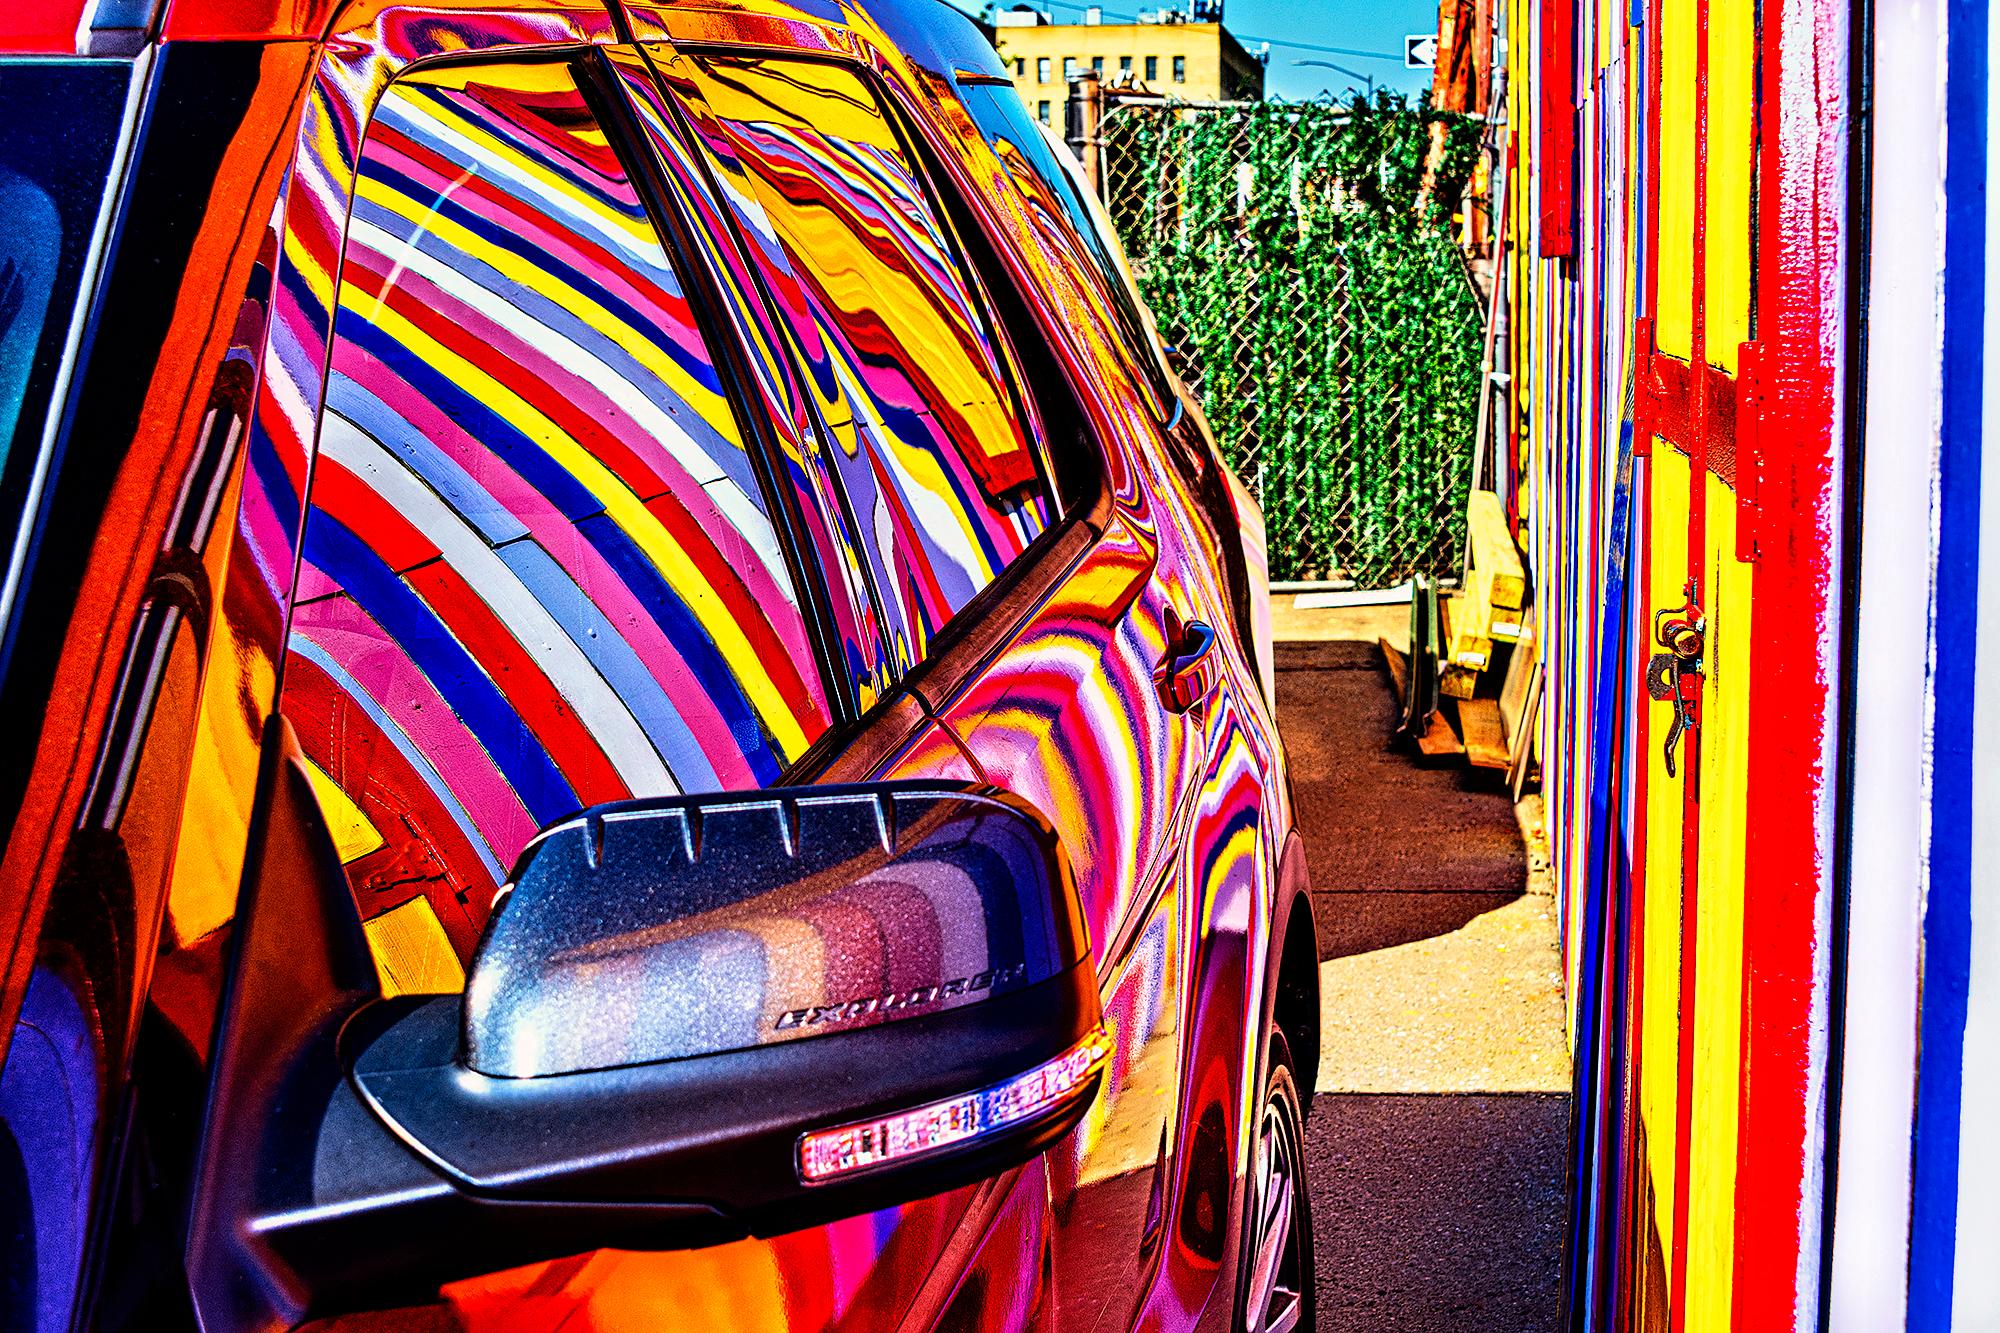 Mitchell Funk Landscape Photograph - Colorful Street Art Reflected in Car